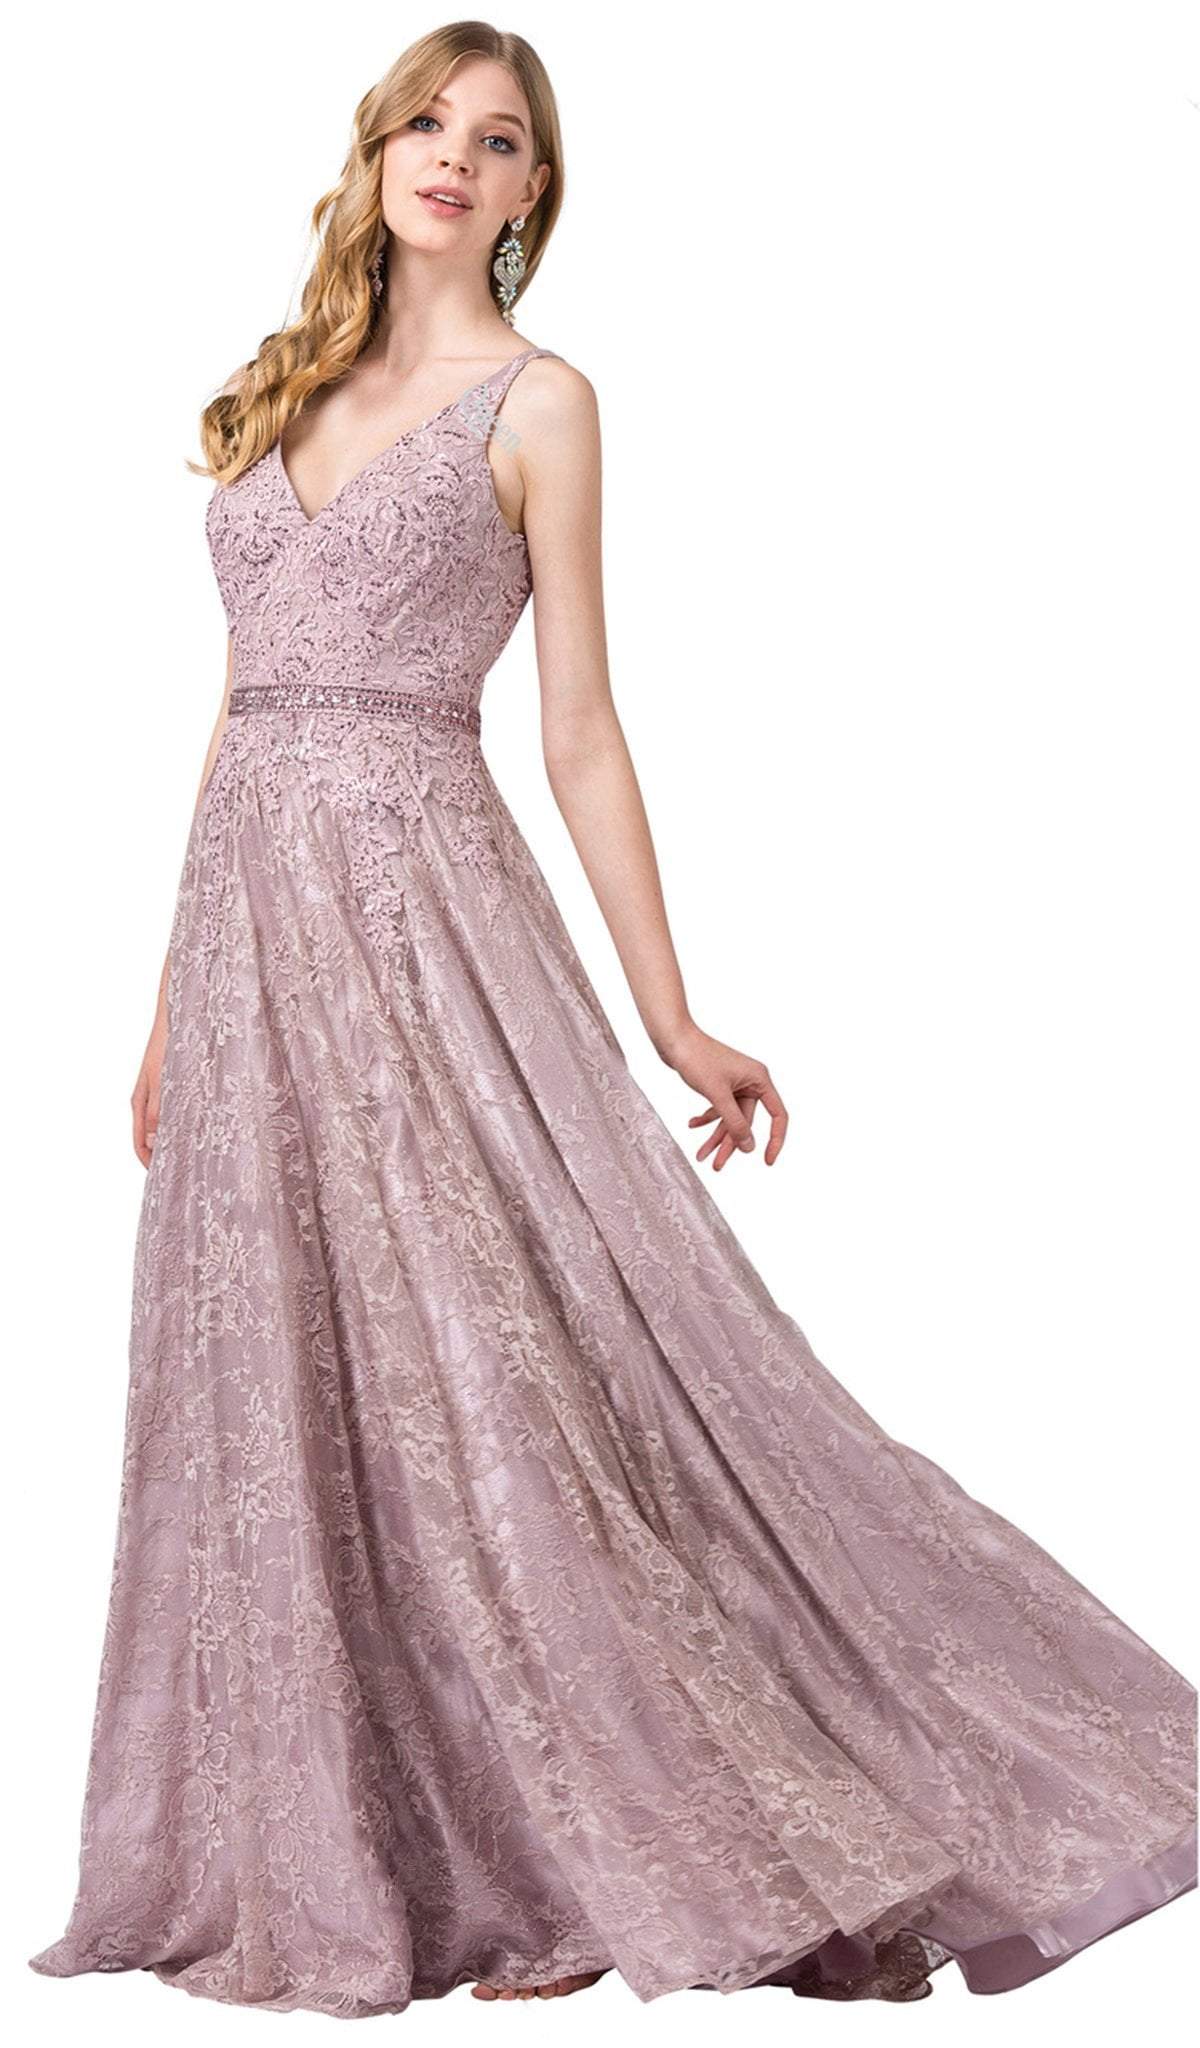 Image of Dancing Queen - 2646 Lace Embroidered V-Neck Prom Dress